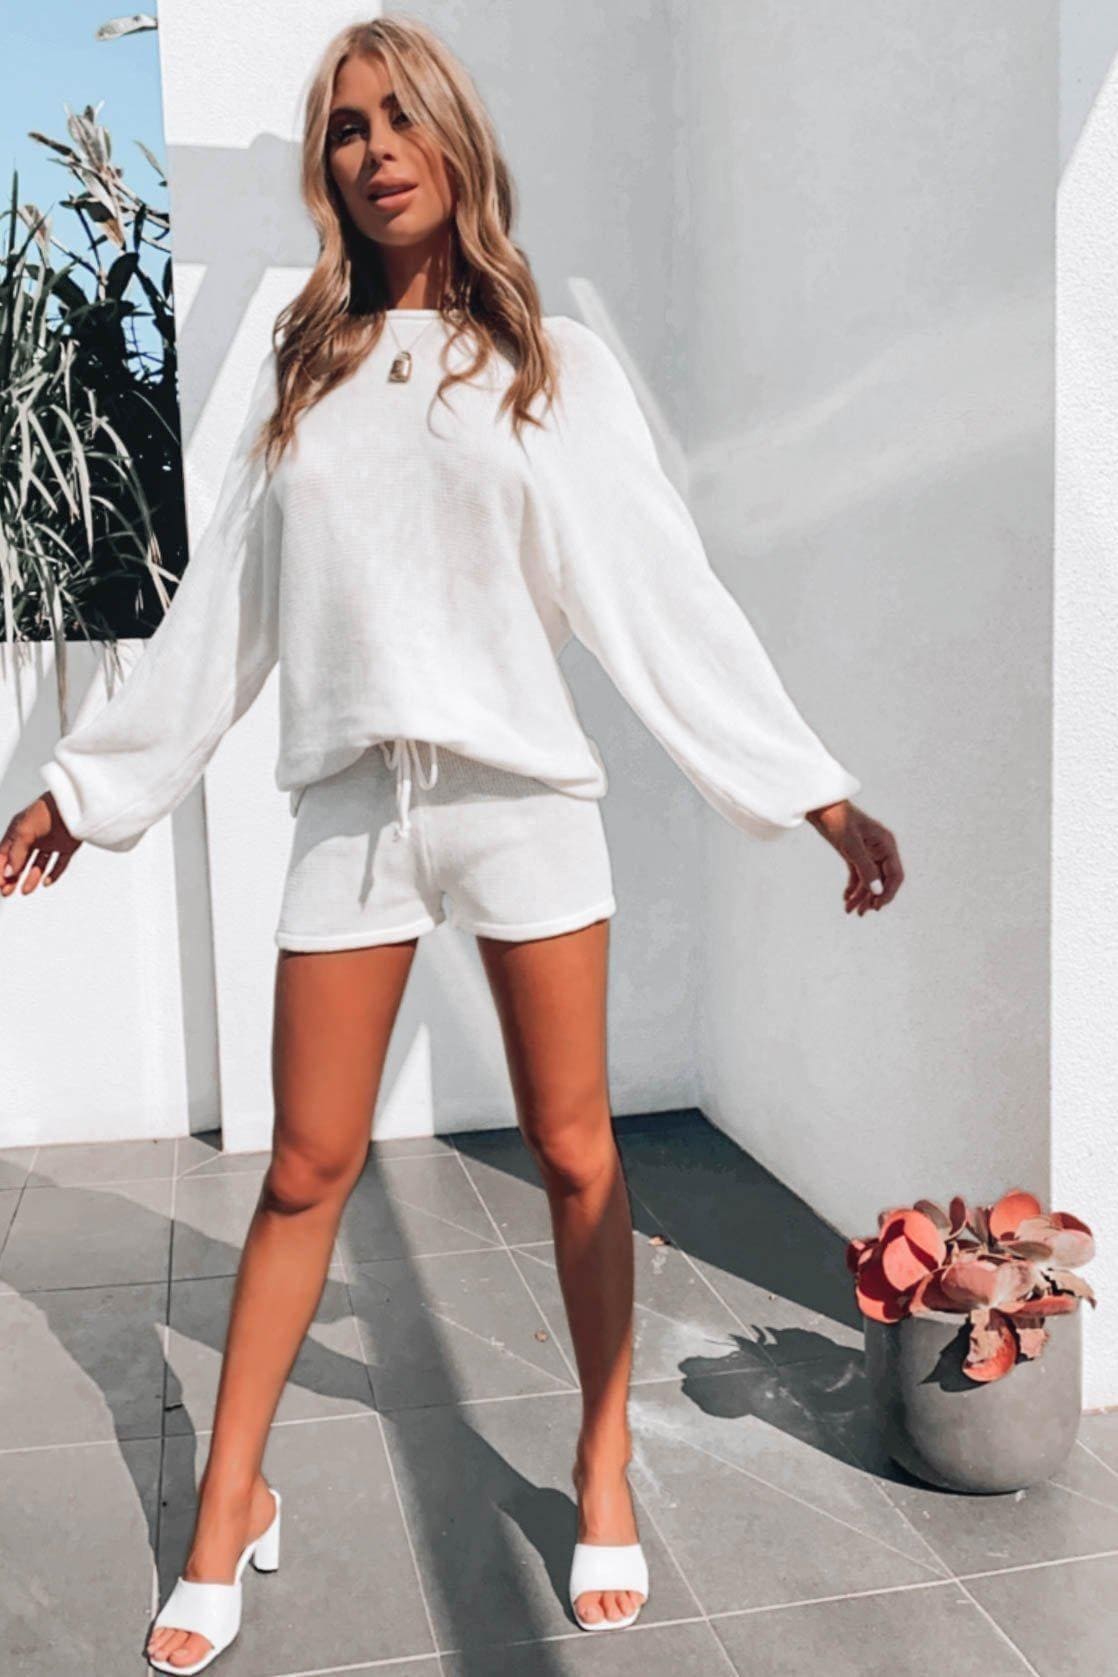 Step Up Shorts, BOTTOMS, Sale, SHORTS, WHITE, Shop The Latest Step Up Shorts Only 40.00 from MISHKAH FASHION:, Our New Step Up Shorts is only $41.00-We Have The Latest Pants | Shorts | Skirts @ Mishkah Online Fashion Boutique-MISHKAH